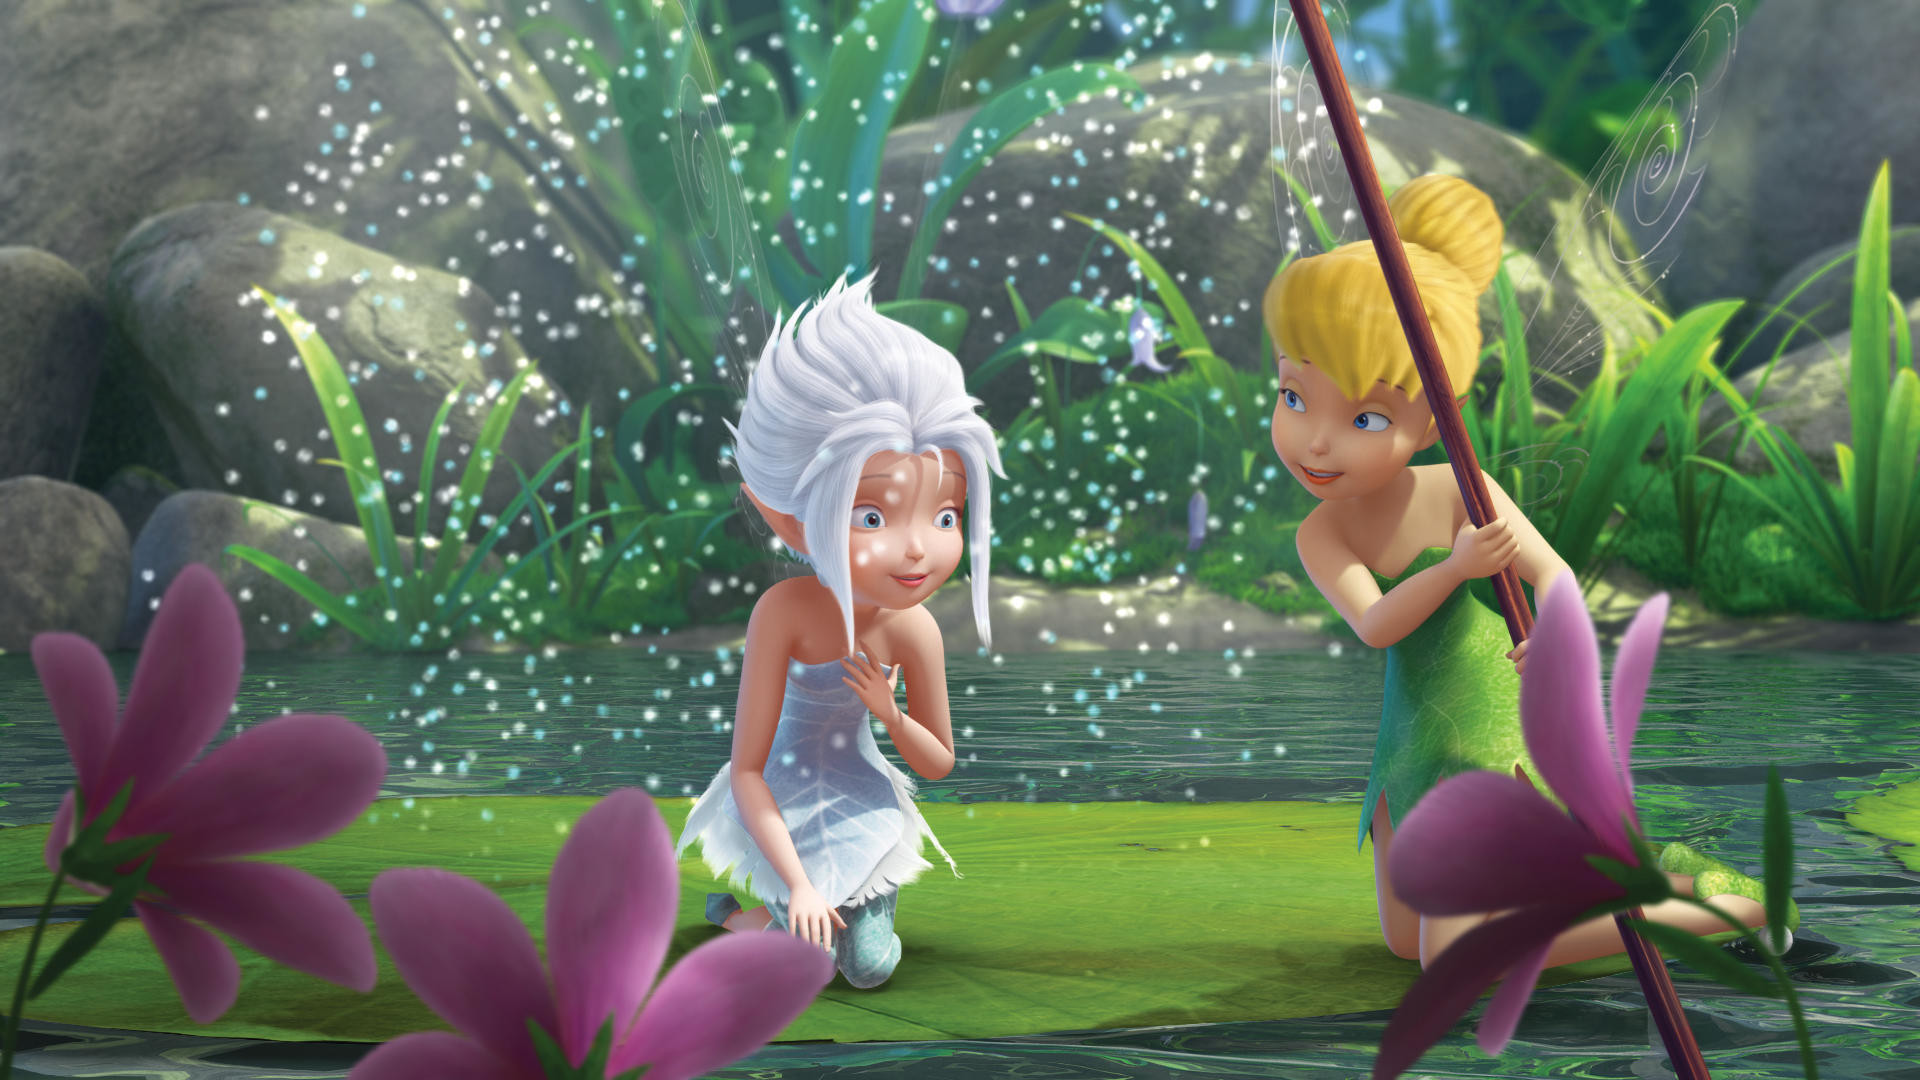 1920x1080 Tinkerbell and Periwinkle